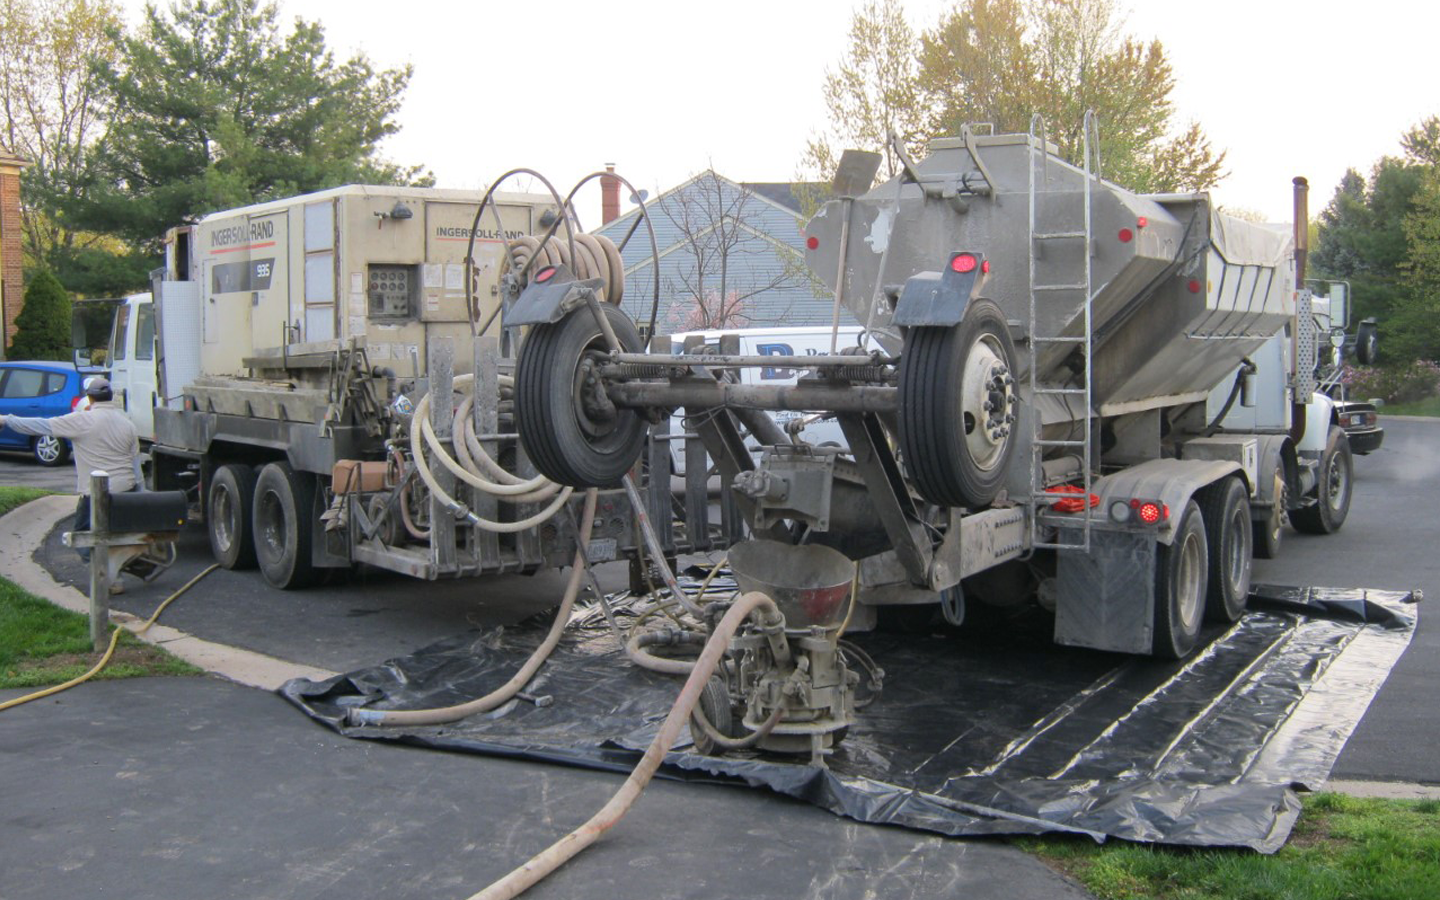  The gunite crew arrives to re-shoot the removed areas of the pool and to lock in the new plumbing fittings. Shown here is the batch truck and compressor truck. Gunite is the raw concrete material pushed through a hose dry, with water added at the no